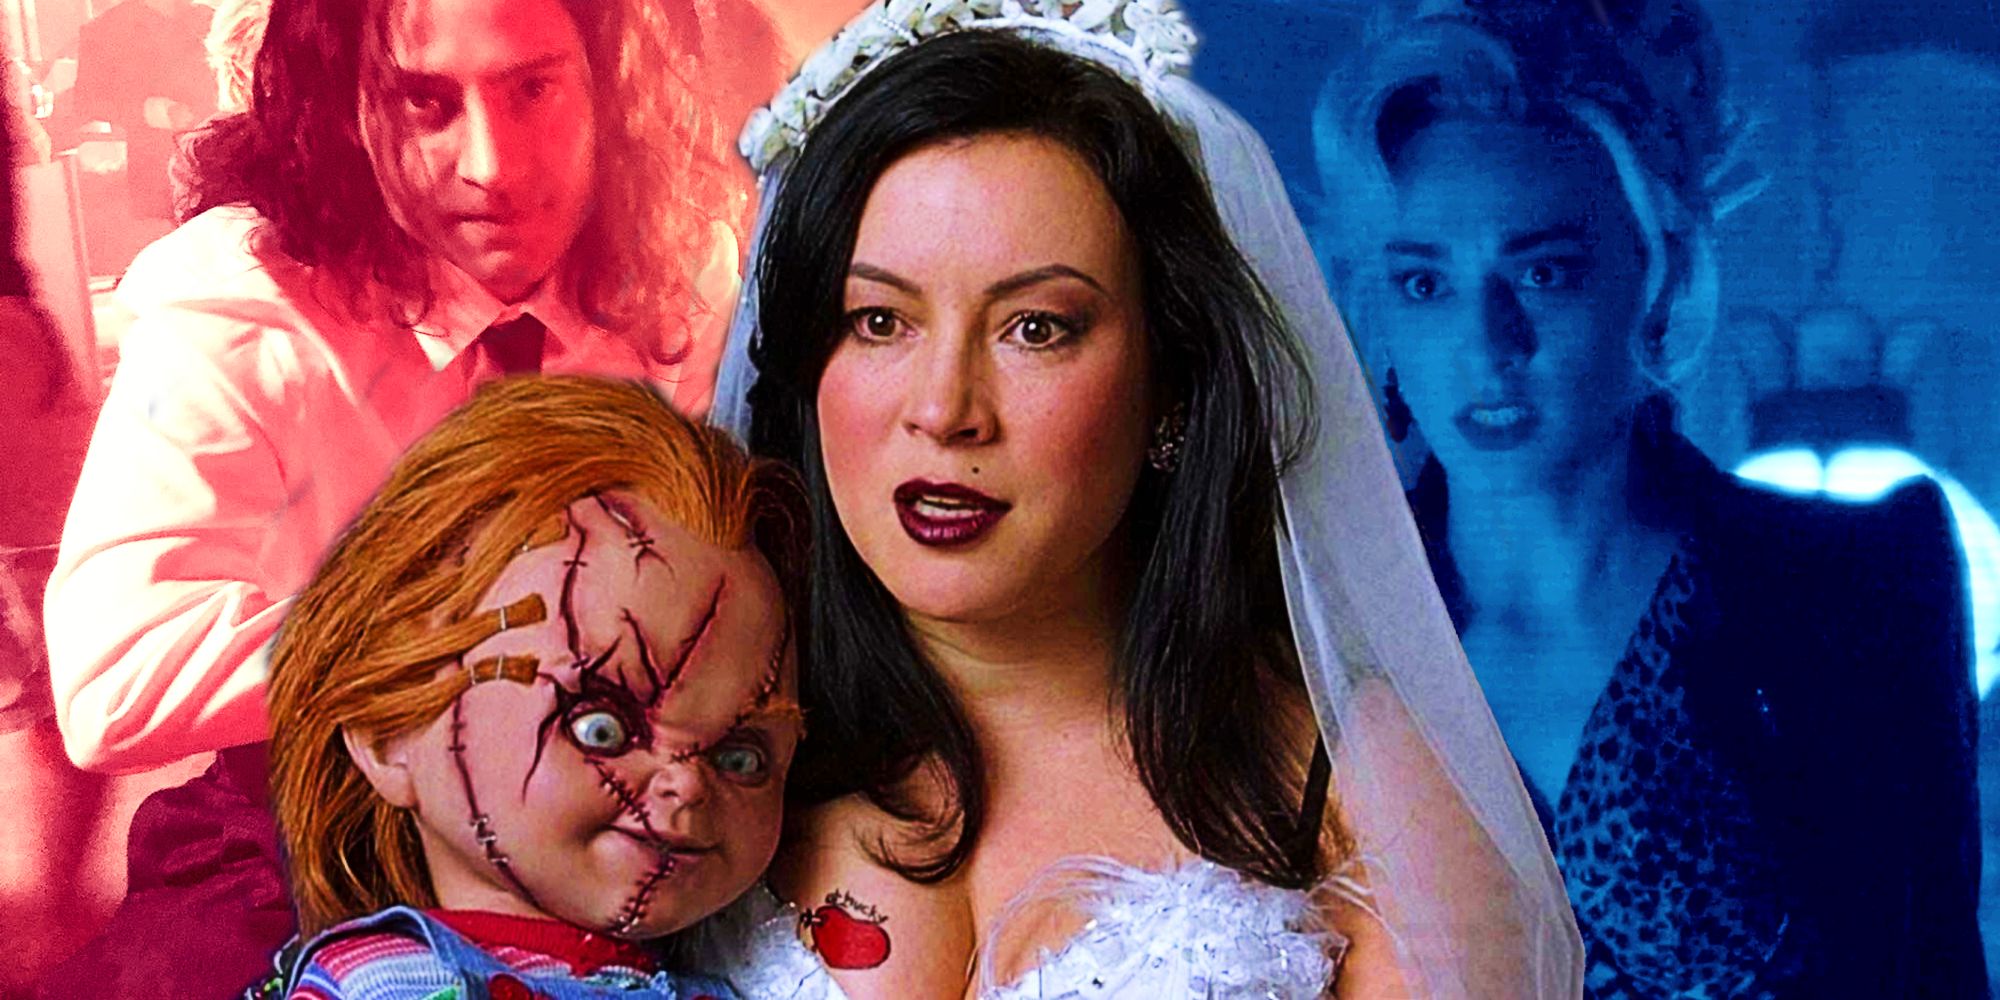 Brad Dourif as Chucky, Fiona Dourif as Young Charles, Jennifer Tilly as Tiffany, and Blaise Crocker as Young Tiffany